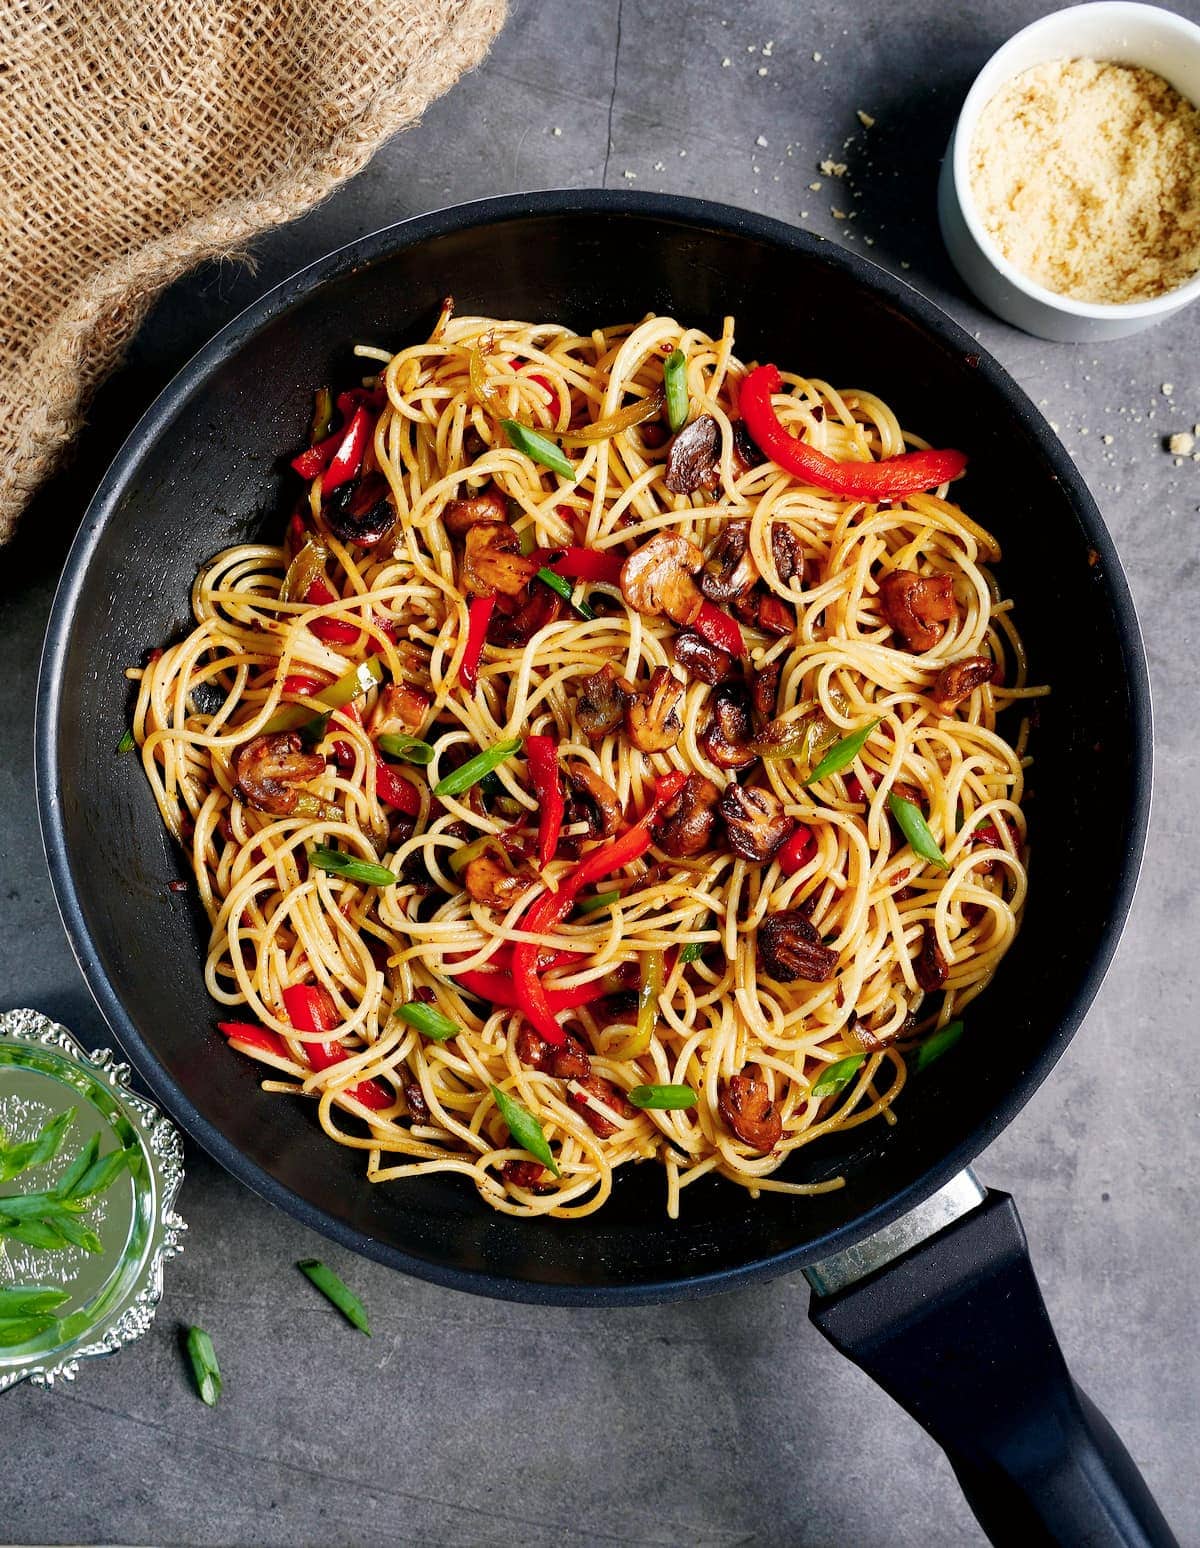 pasta aglio e olio in black skillet with red peppers and mushrooms from above